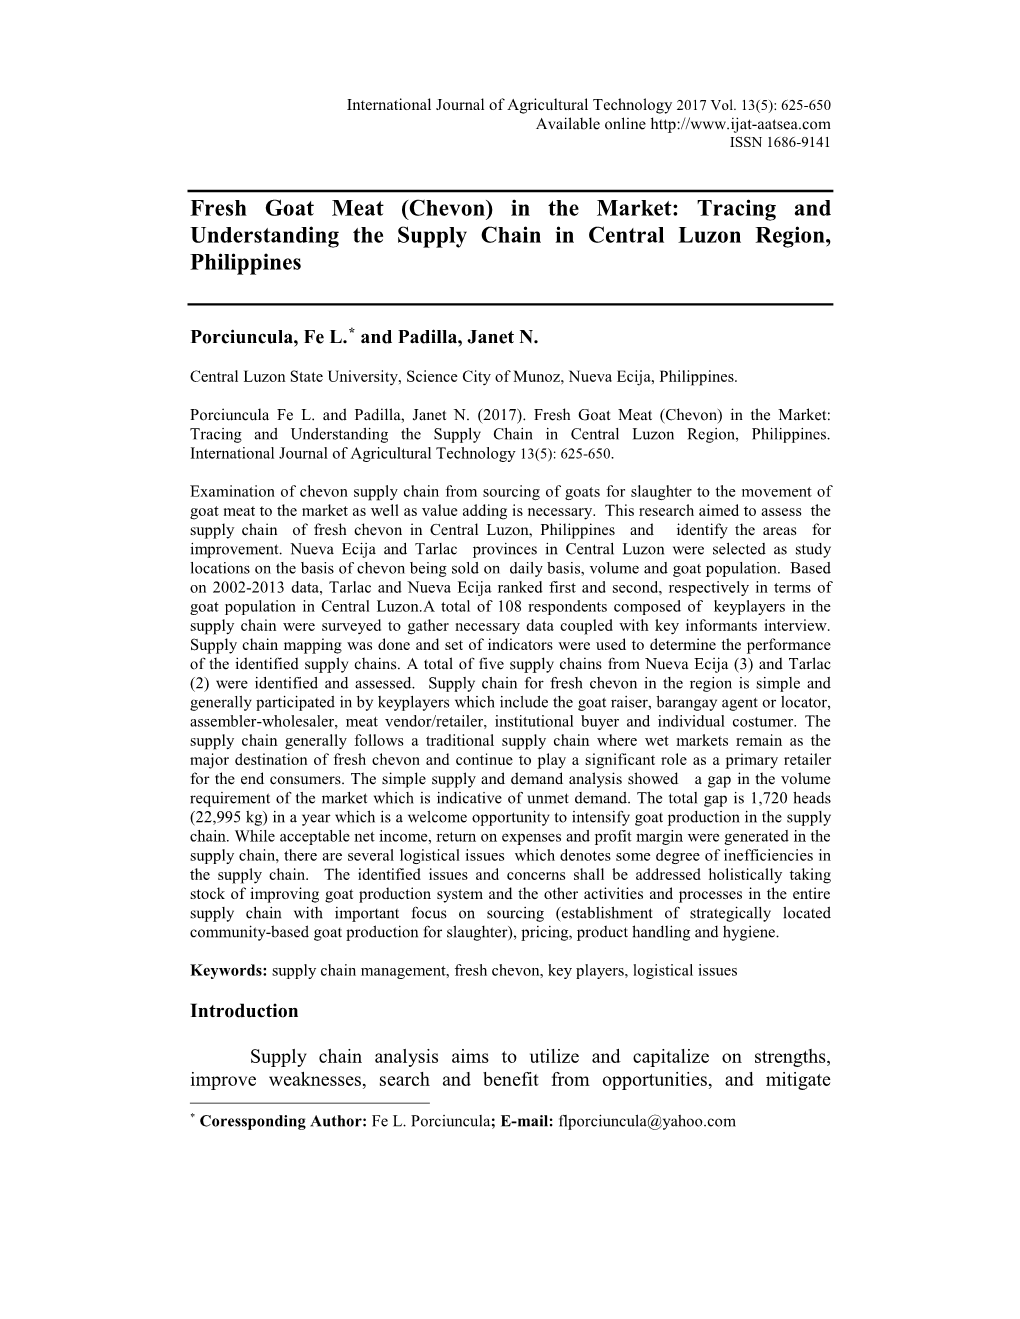 Fresh Goat Meat (Chevon) in the Market: Tracing and Understanding the Supply Chain in Central Luzon Region, Philippines